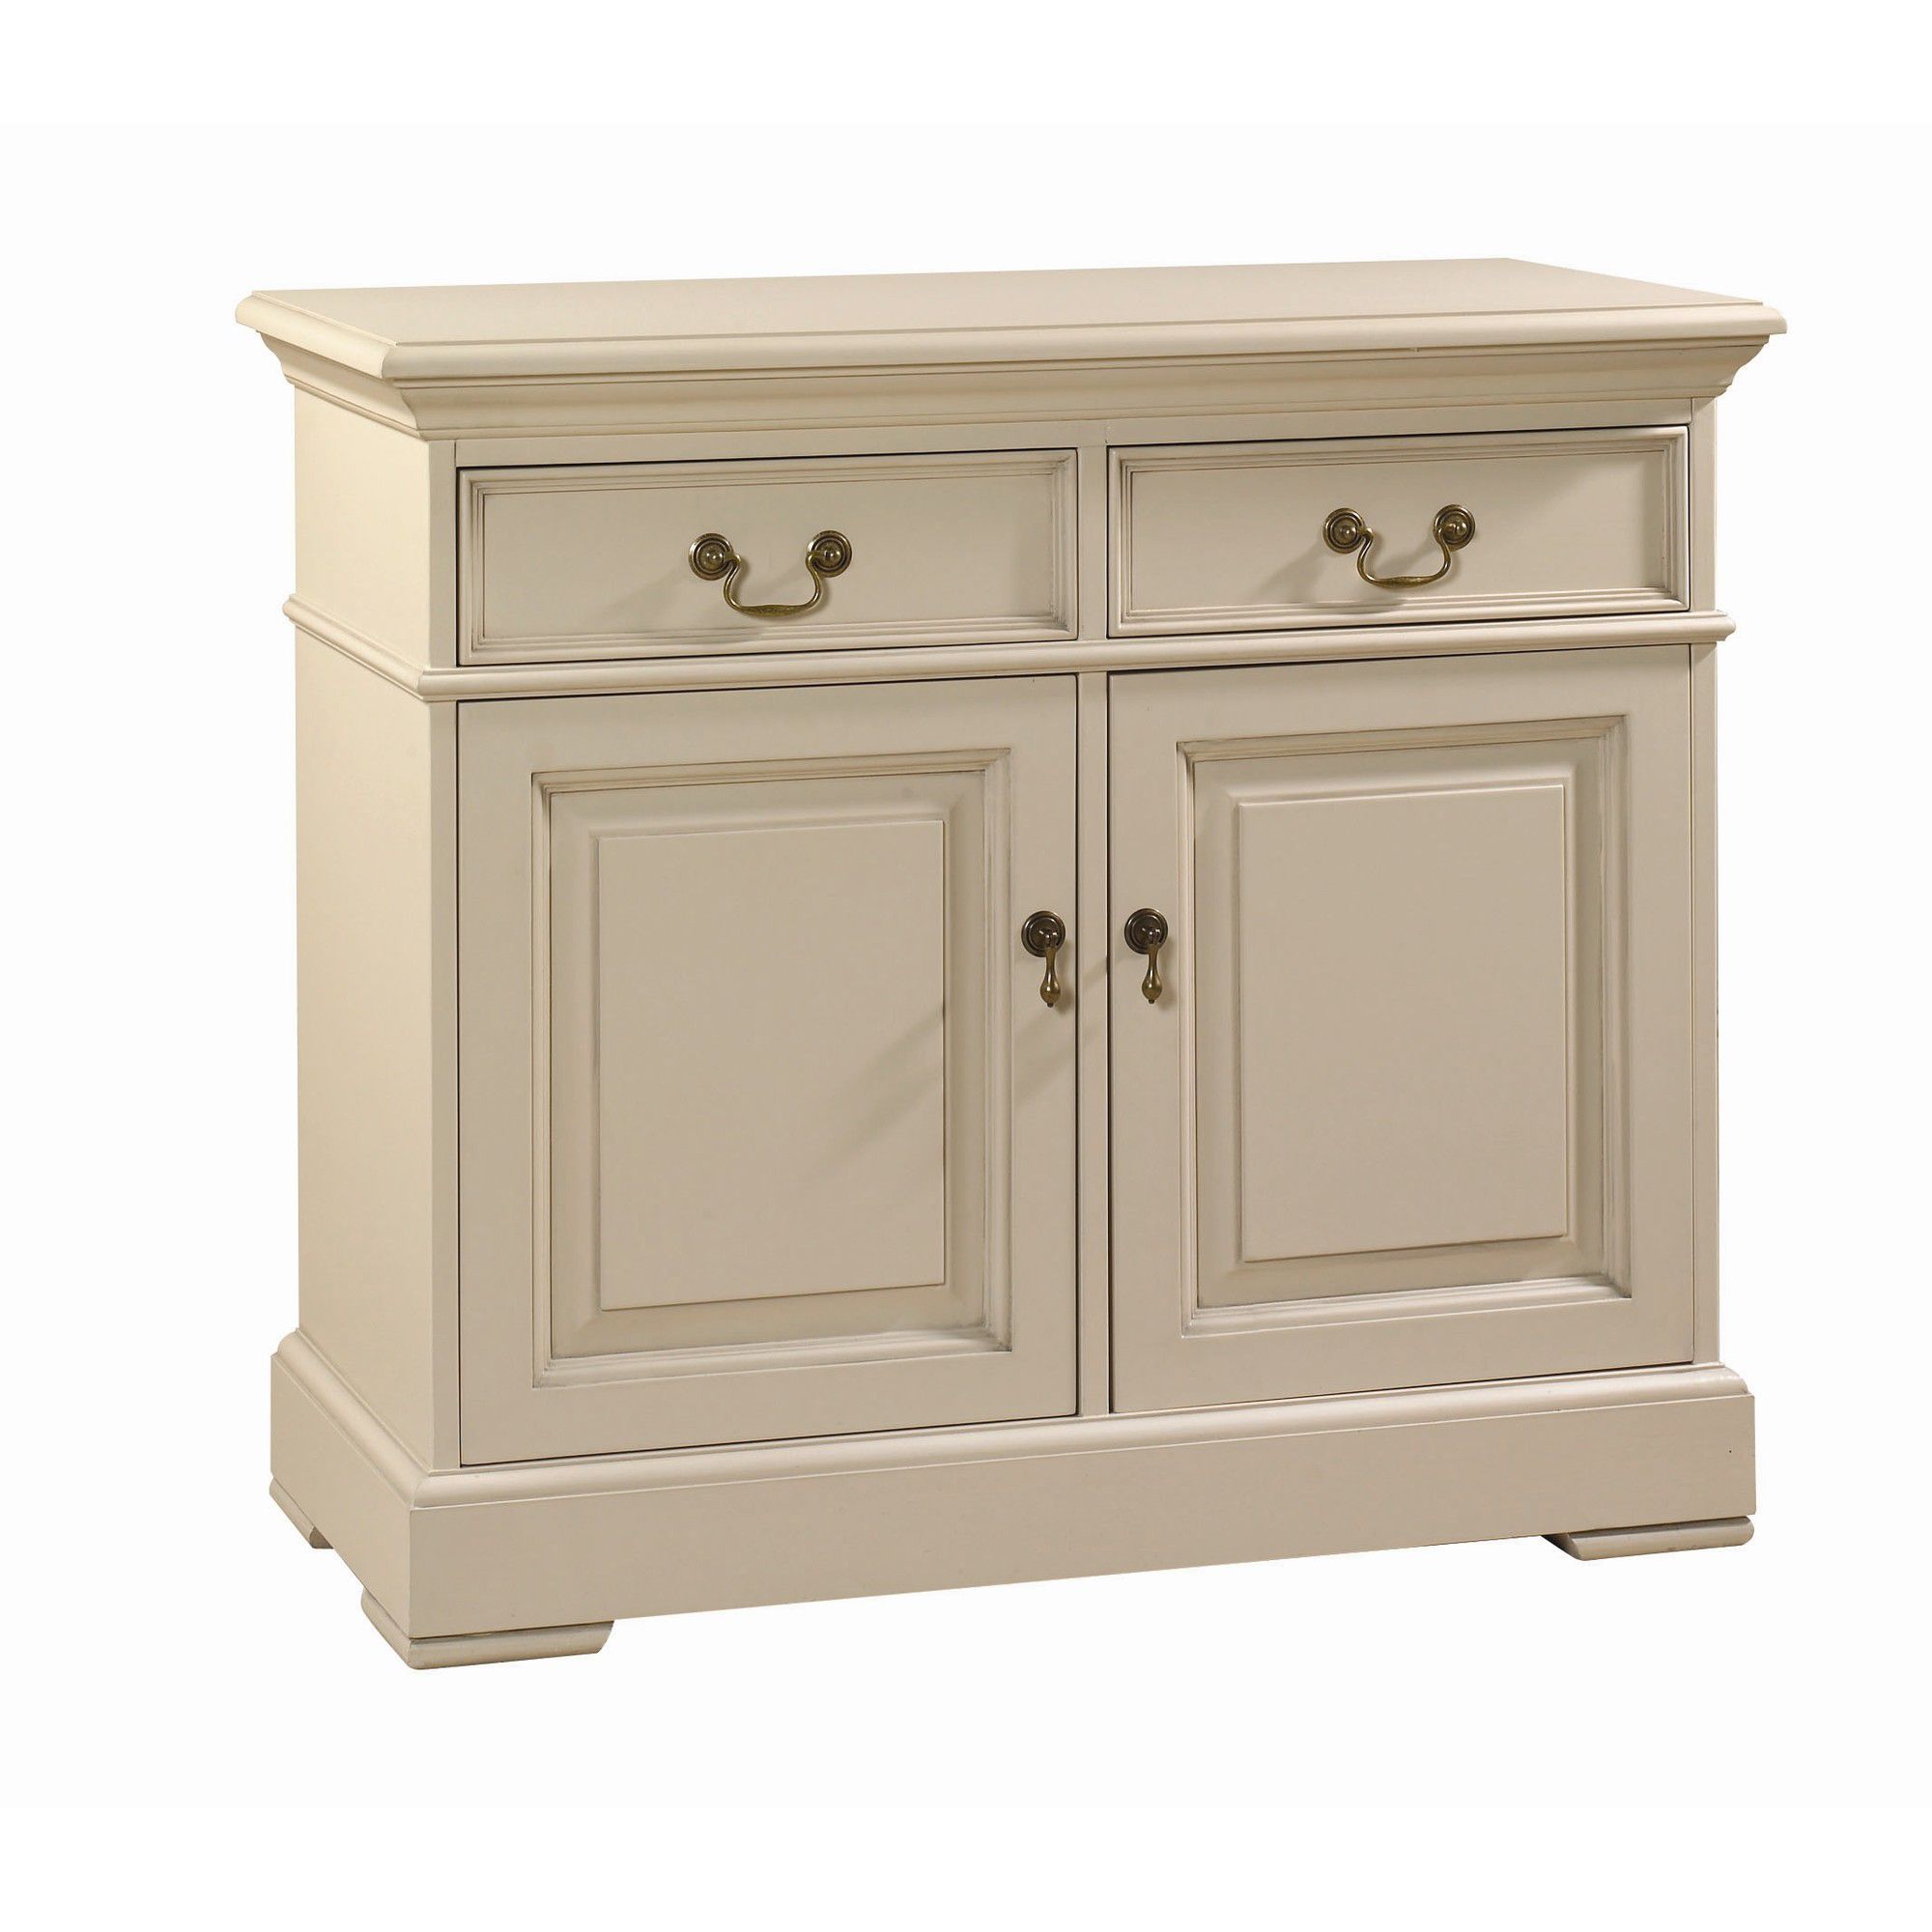 YP Furniture Country House Two Door Sideboard - Ivory at Tesco Direct